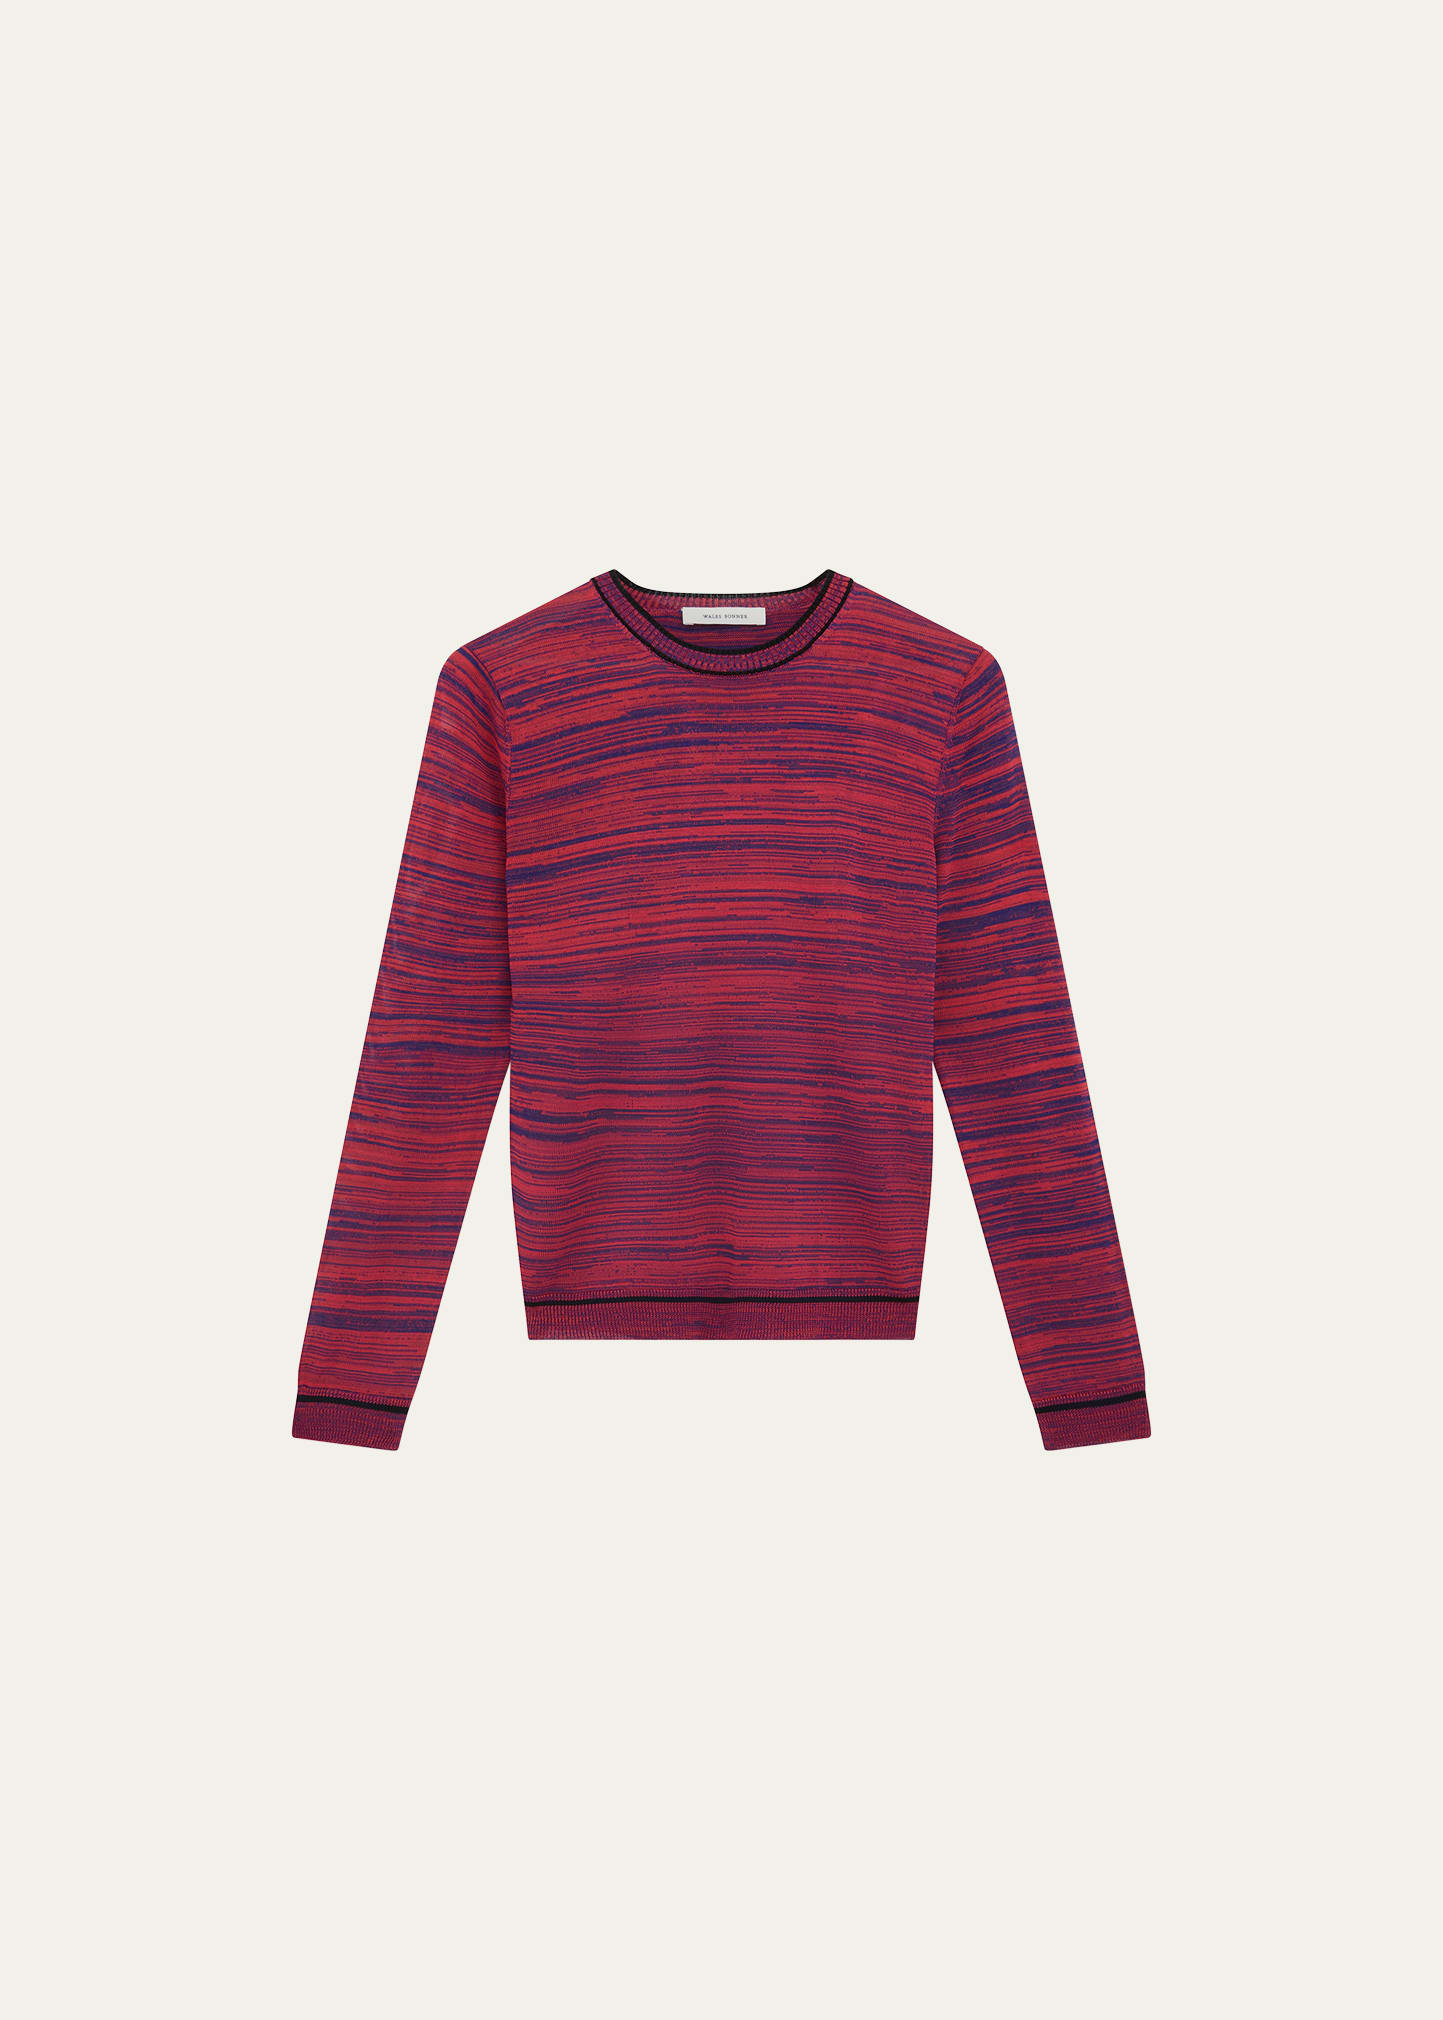 Wales Bonner Steady Knit Top In Navy Red And Purp